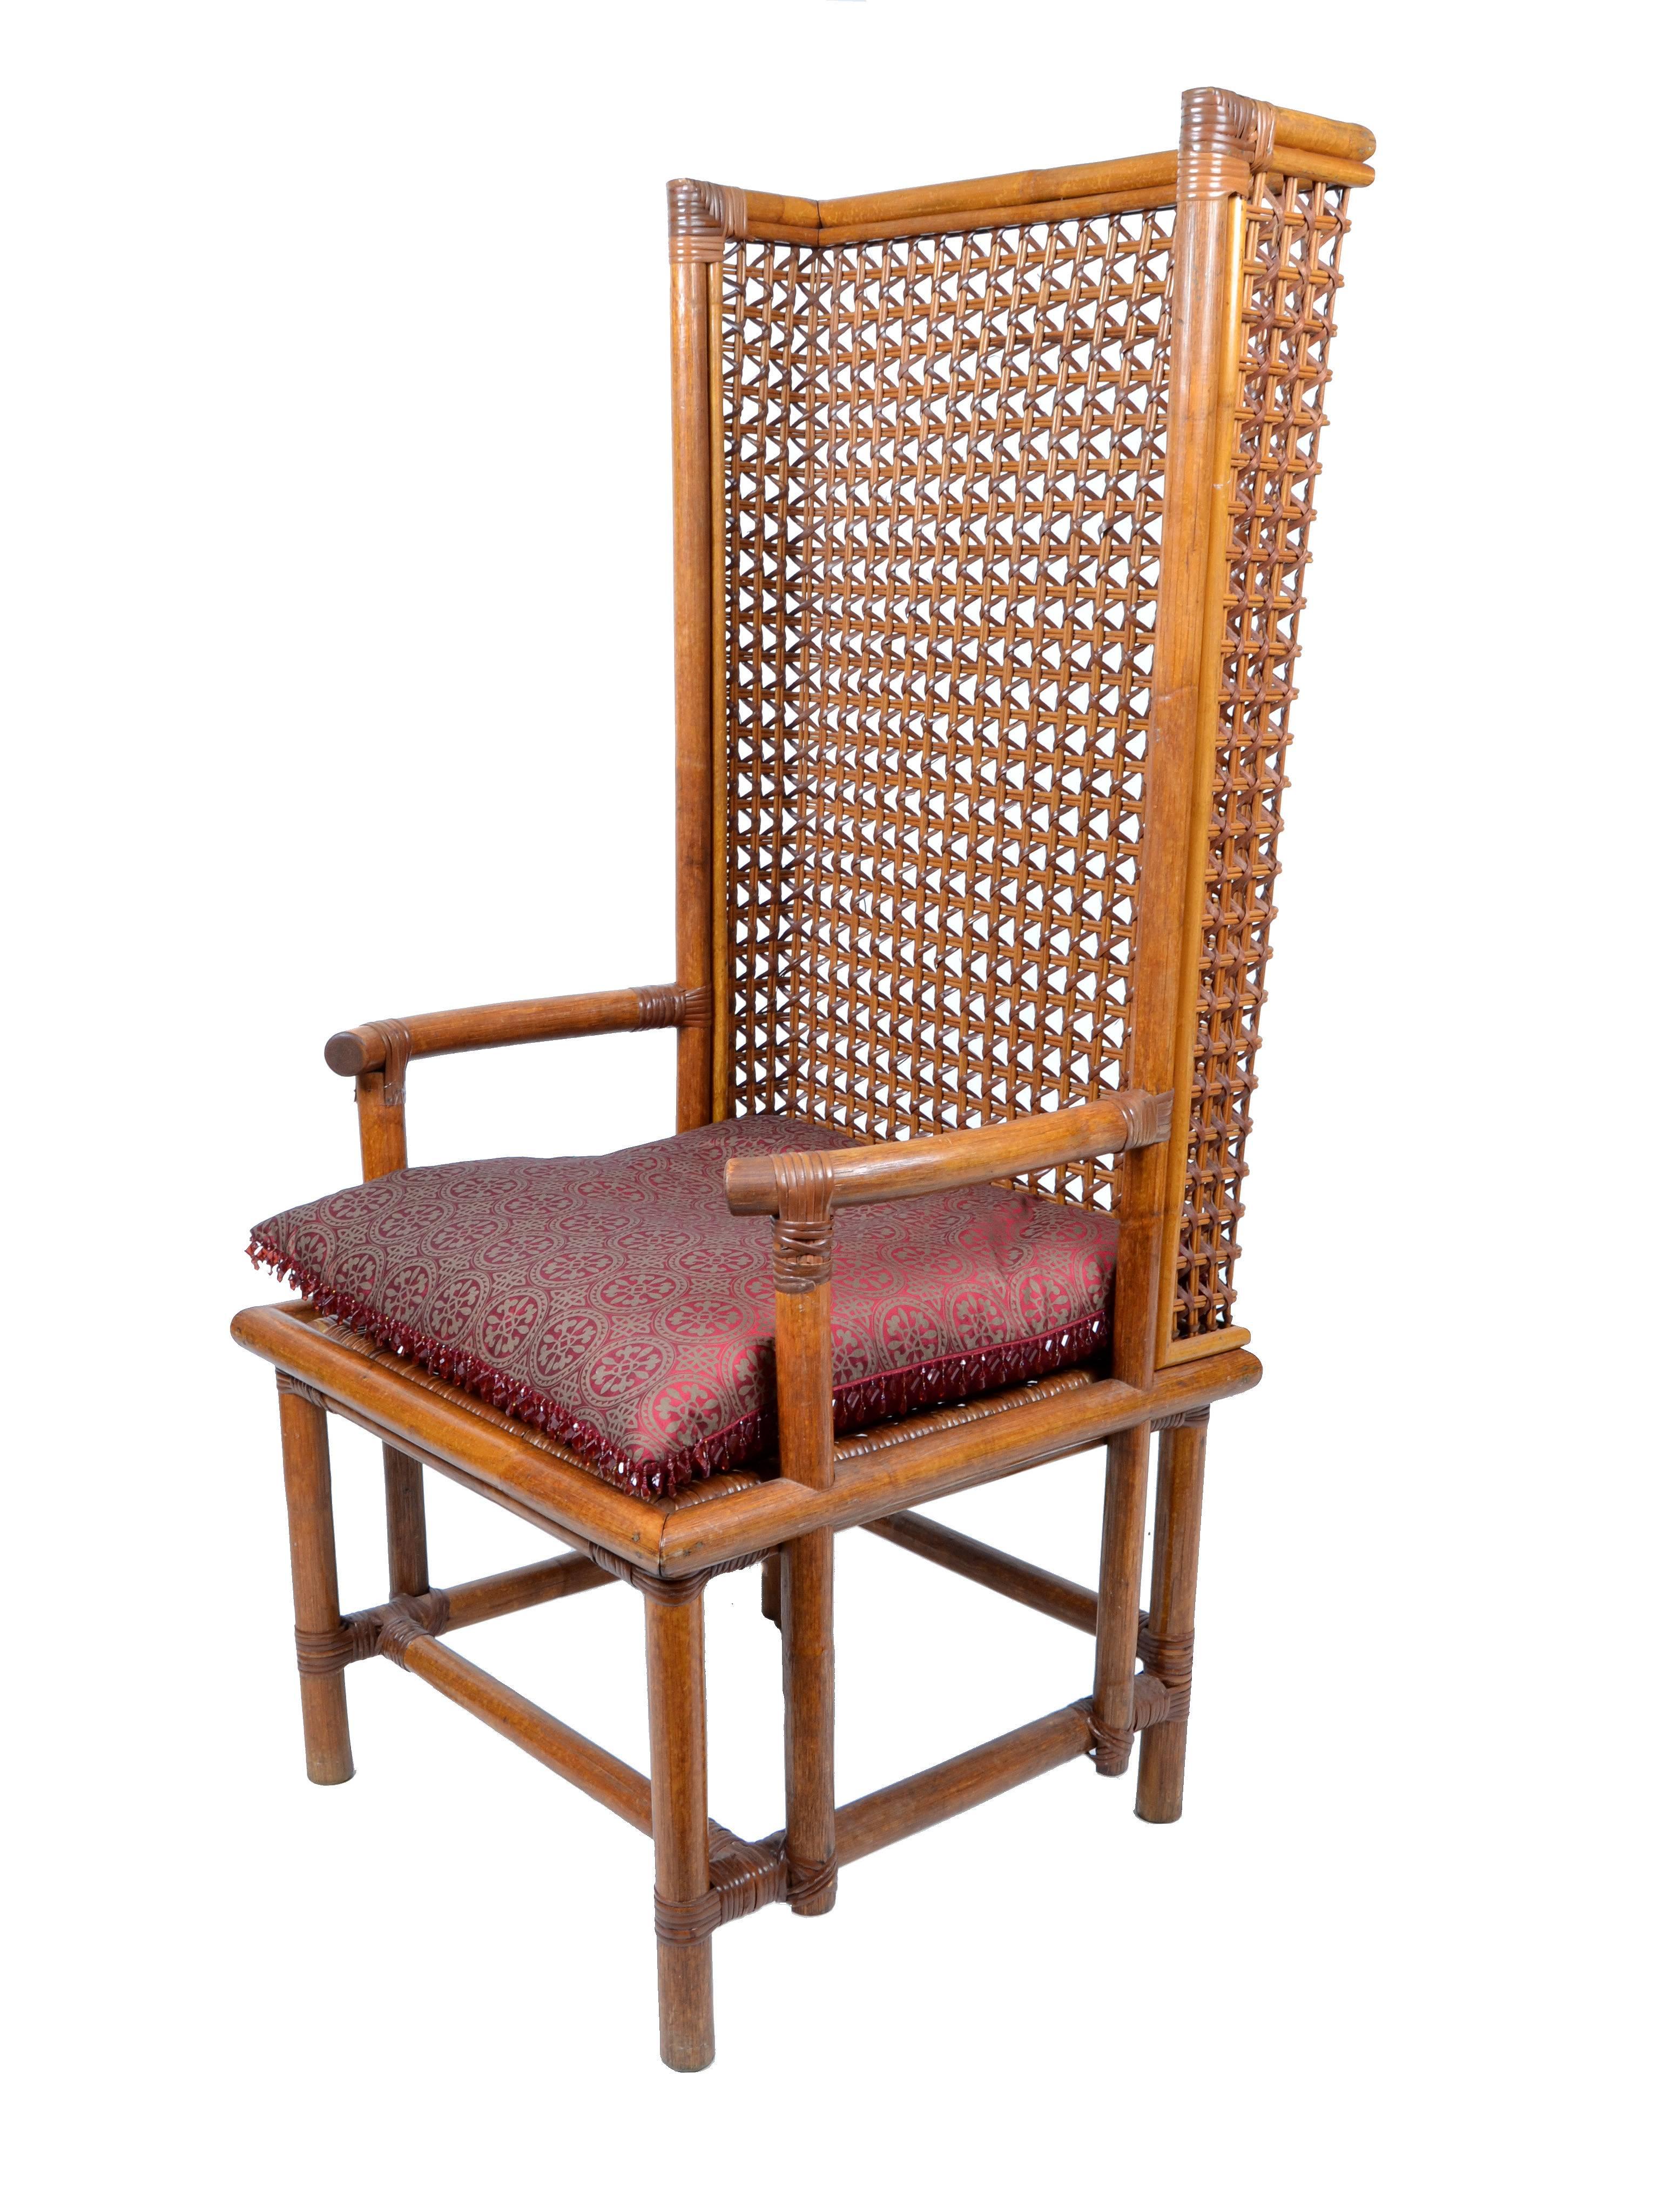 Vintage bamboo and cane Chinese Chippendale style high back chair.
Comes with a seat cushion.


Dimension:
Seat height 20 inches
Arm height 26 inches.